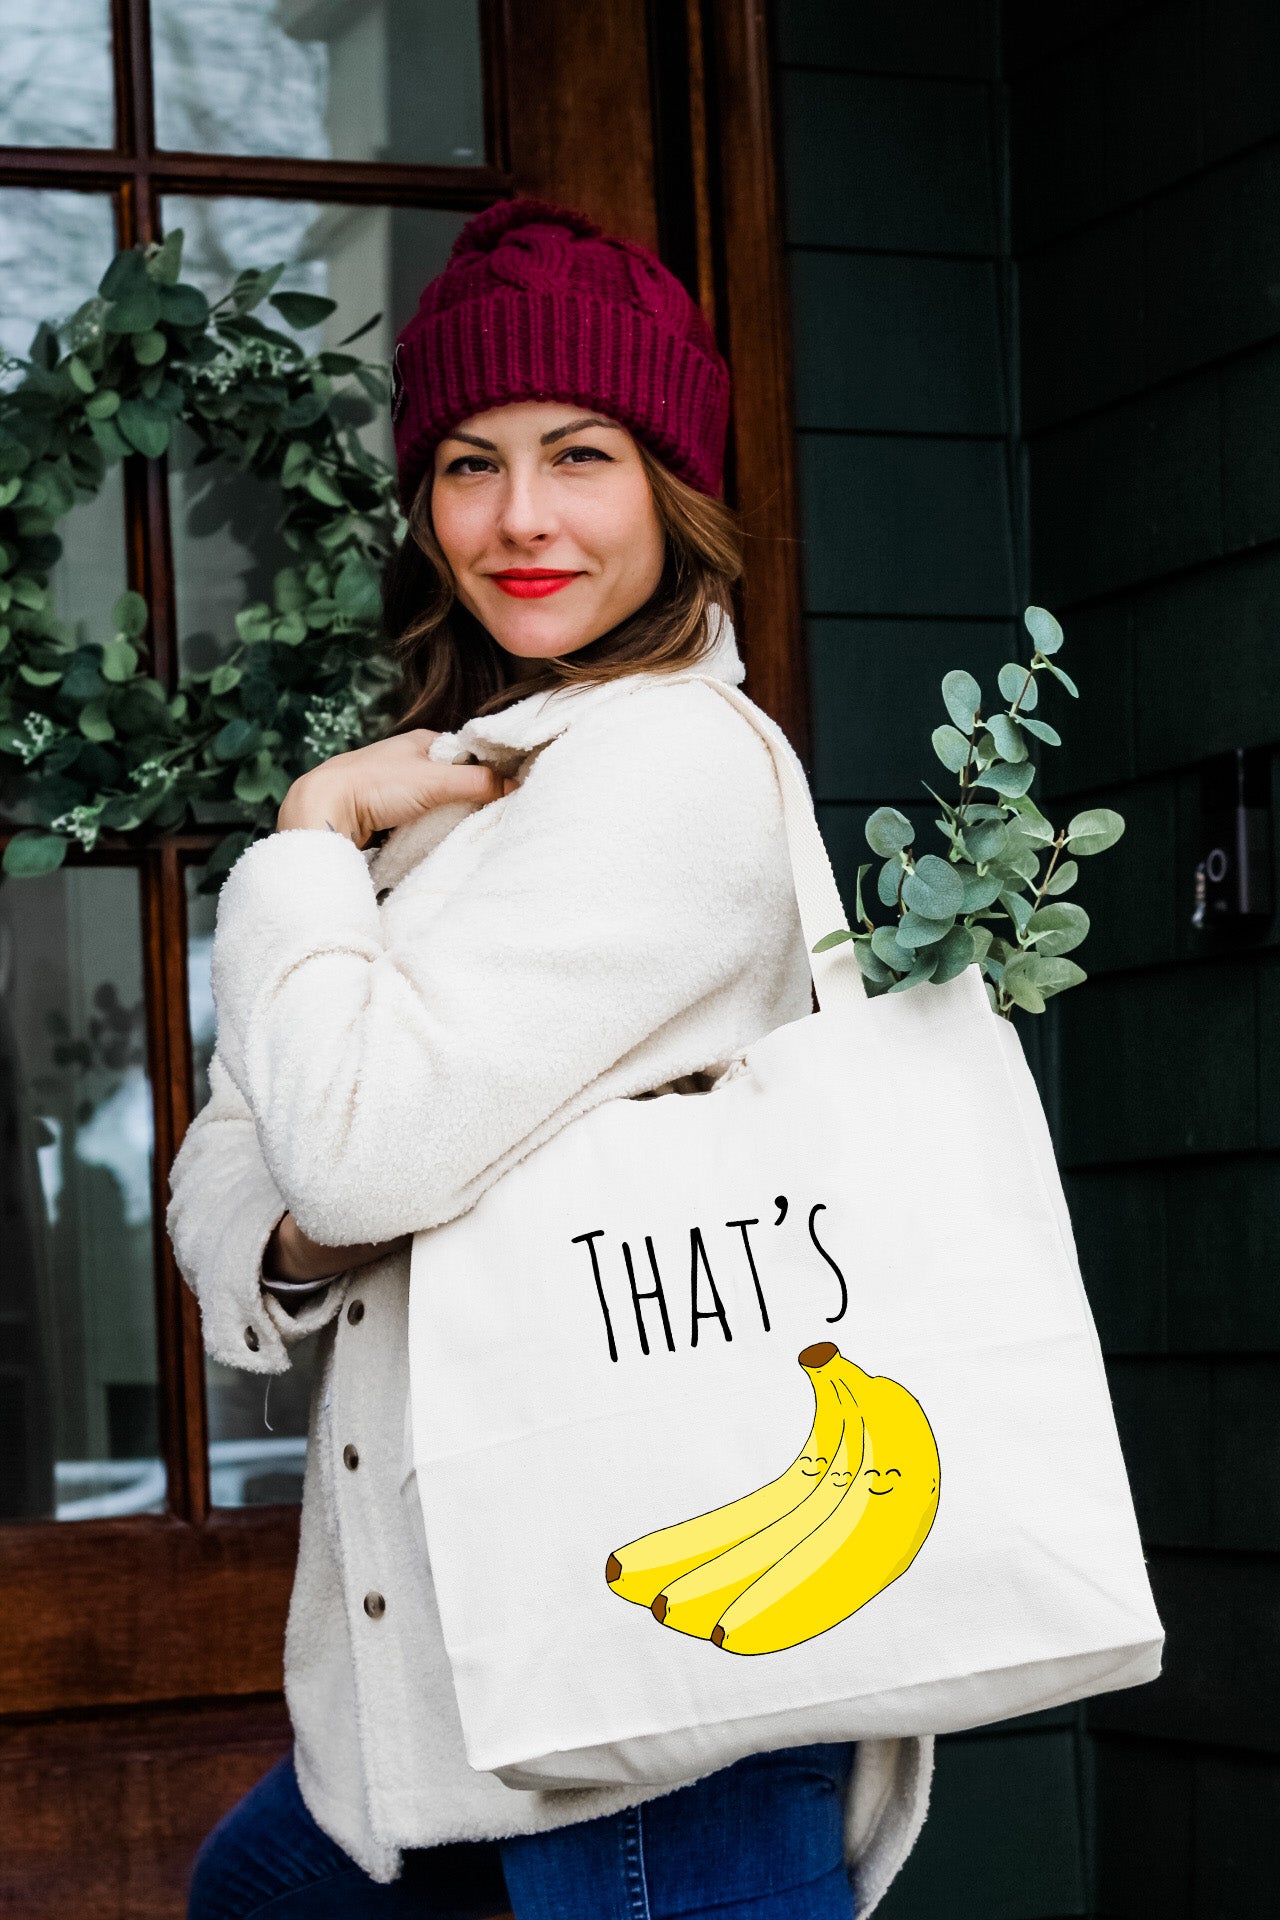 That's Bananas - Full Color Tote